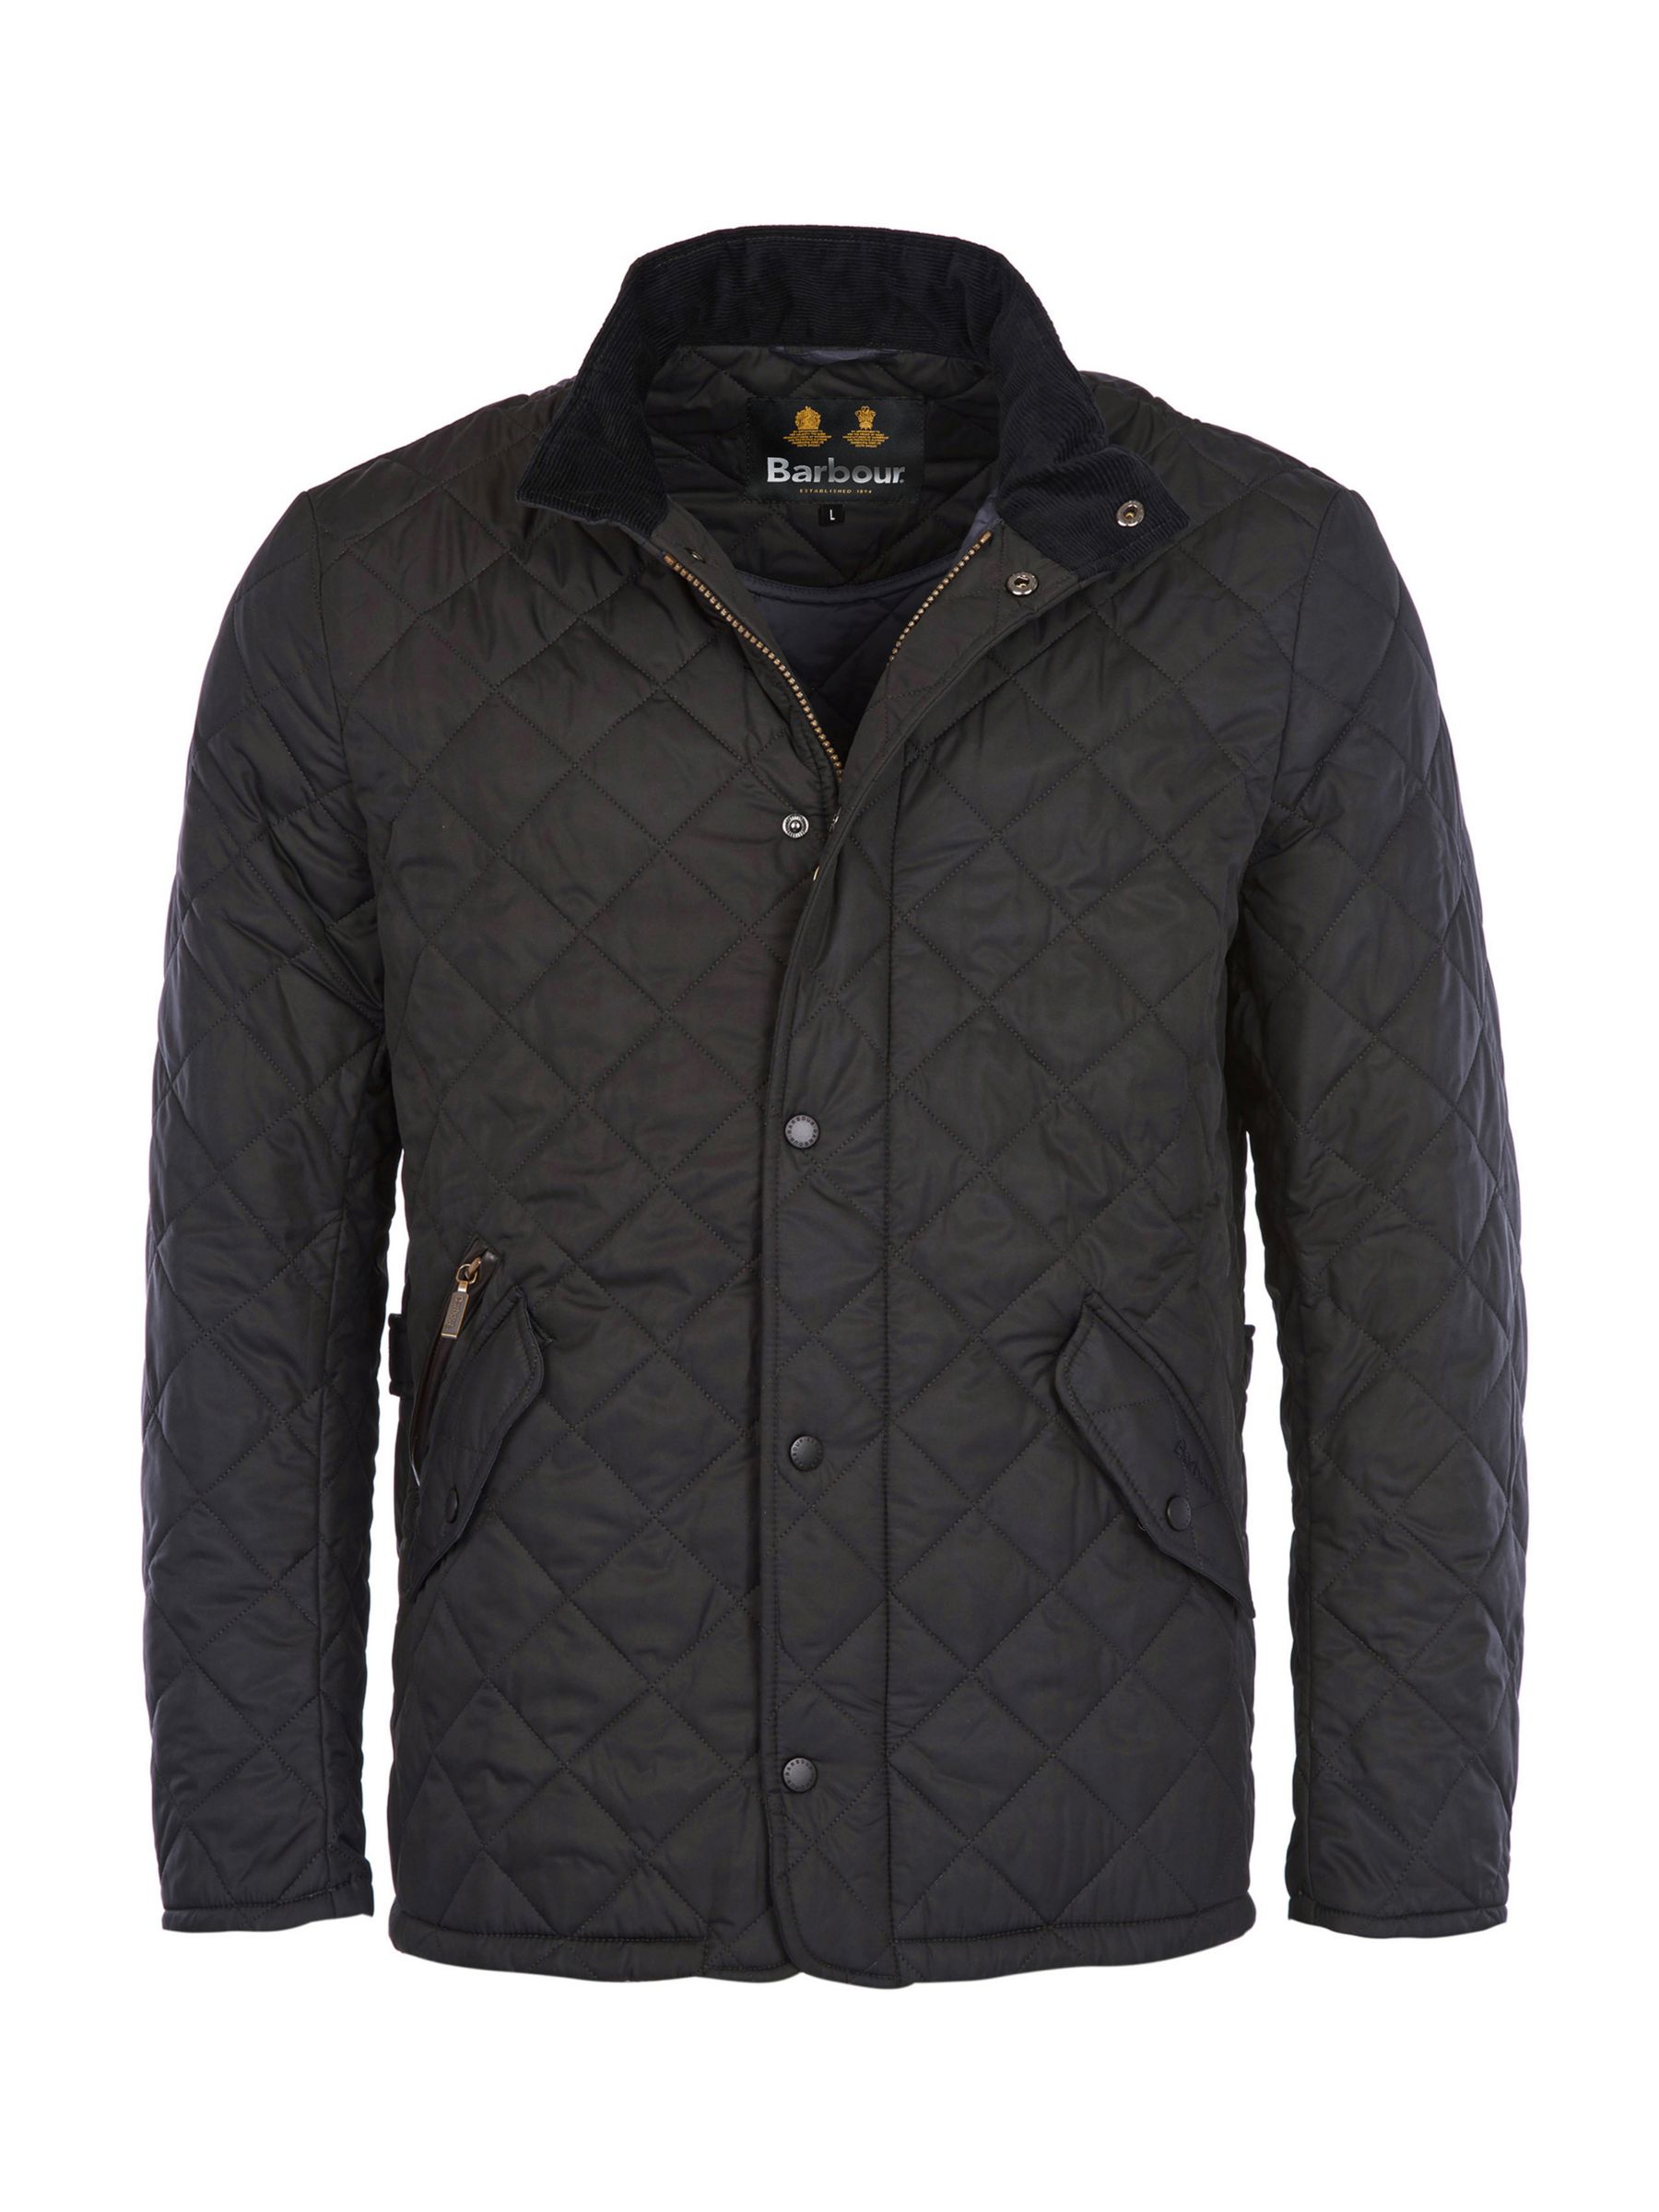 Barbour Chelsea Sportsquilt Quilted Jacket, Navy at John Lewis & Partners